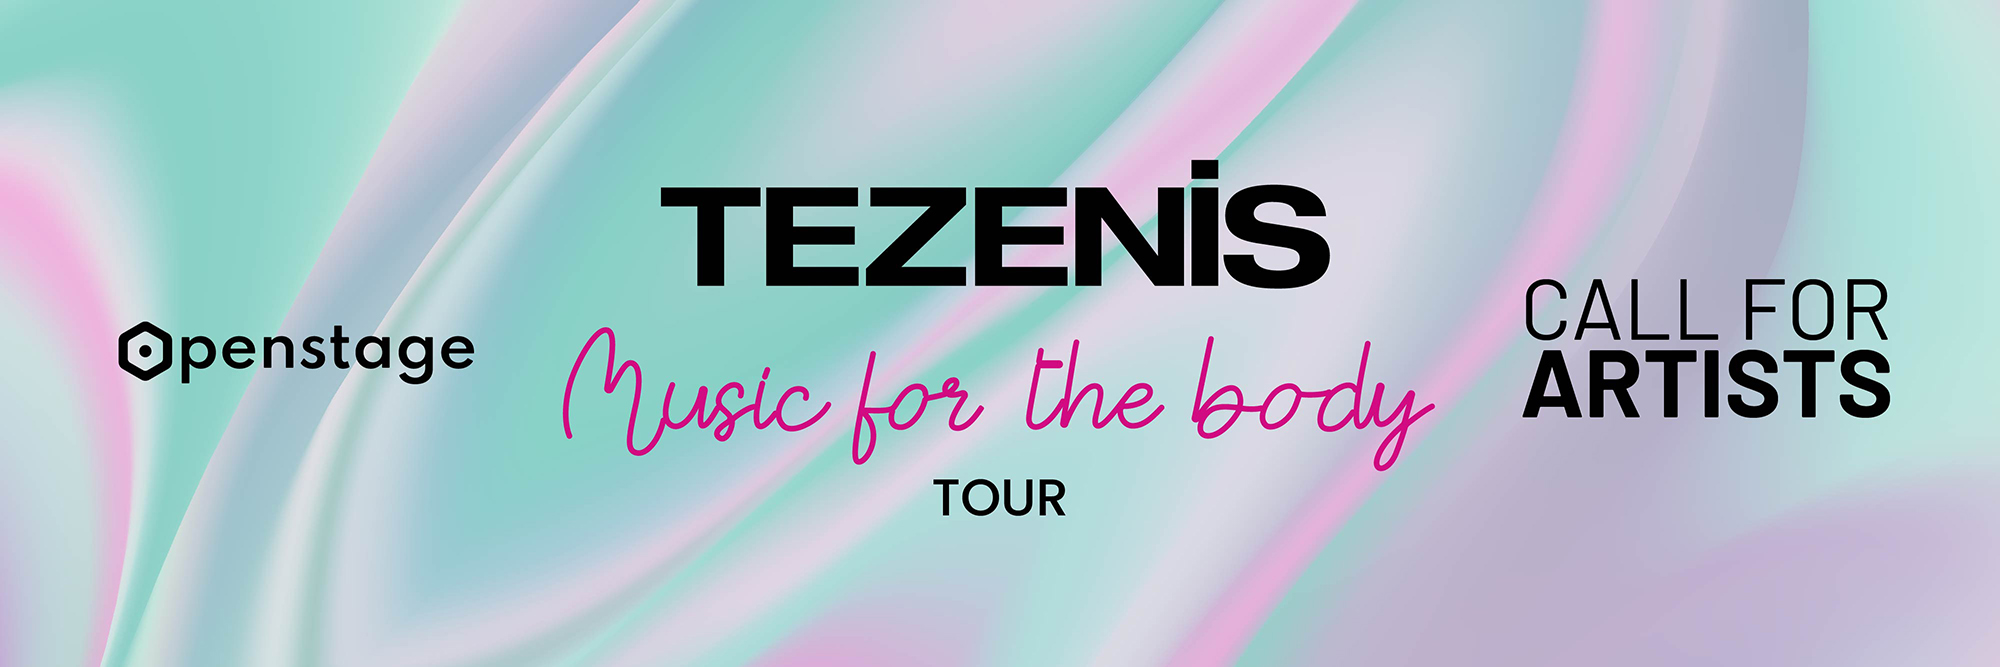 Tezenis music for the body tour - call for artists - Openstage